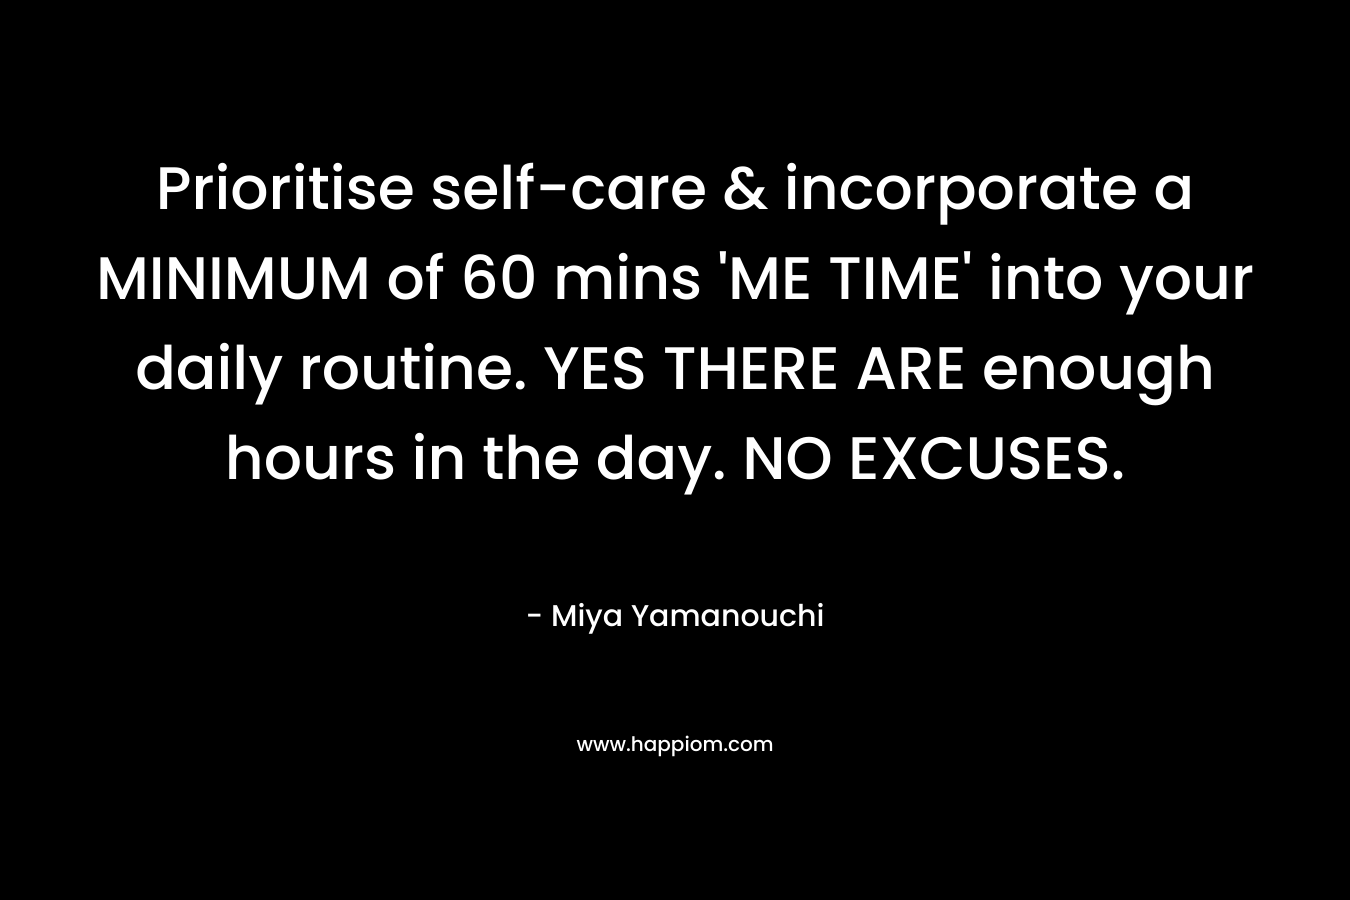 Prioritise self-care & incorporate a MINIMUM of 60 mins ‘ME TIME’ into your daily routine. YES THERE ARE enough hours in the day. NO EXCUSES. – Miya Yamanouchi